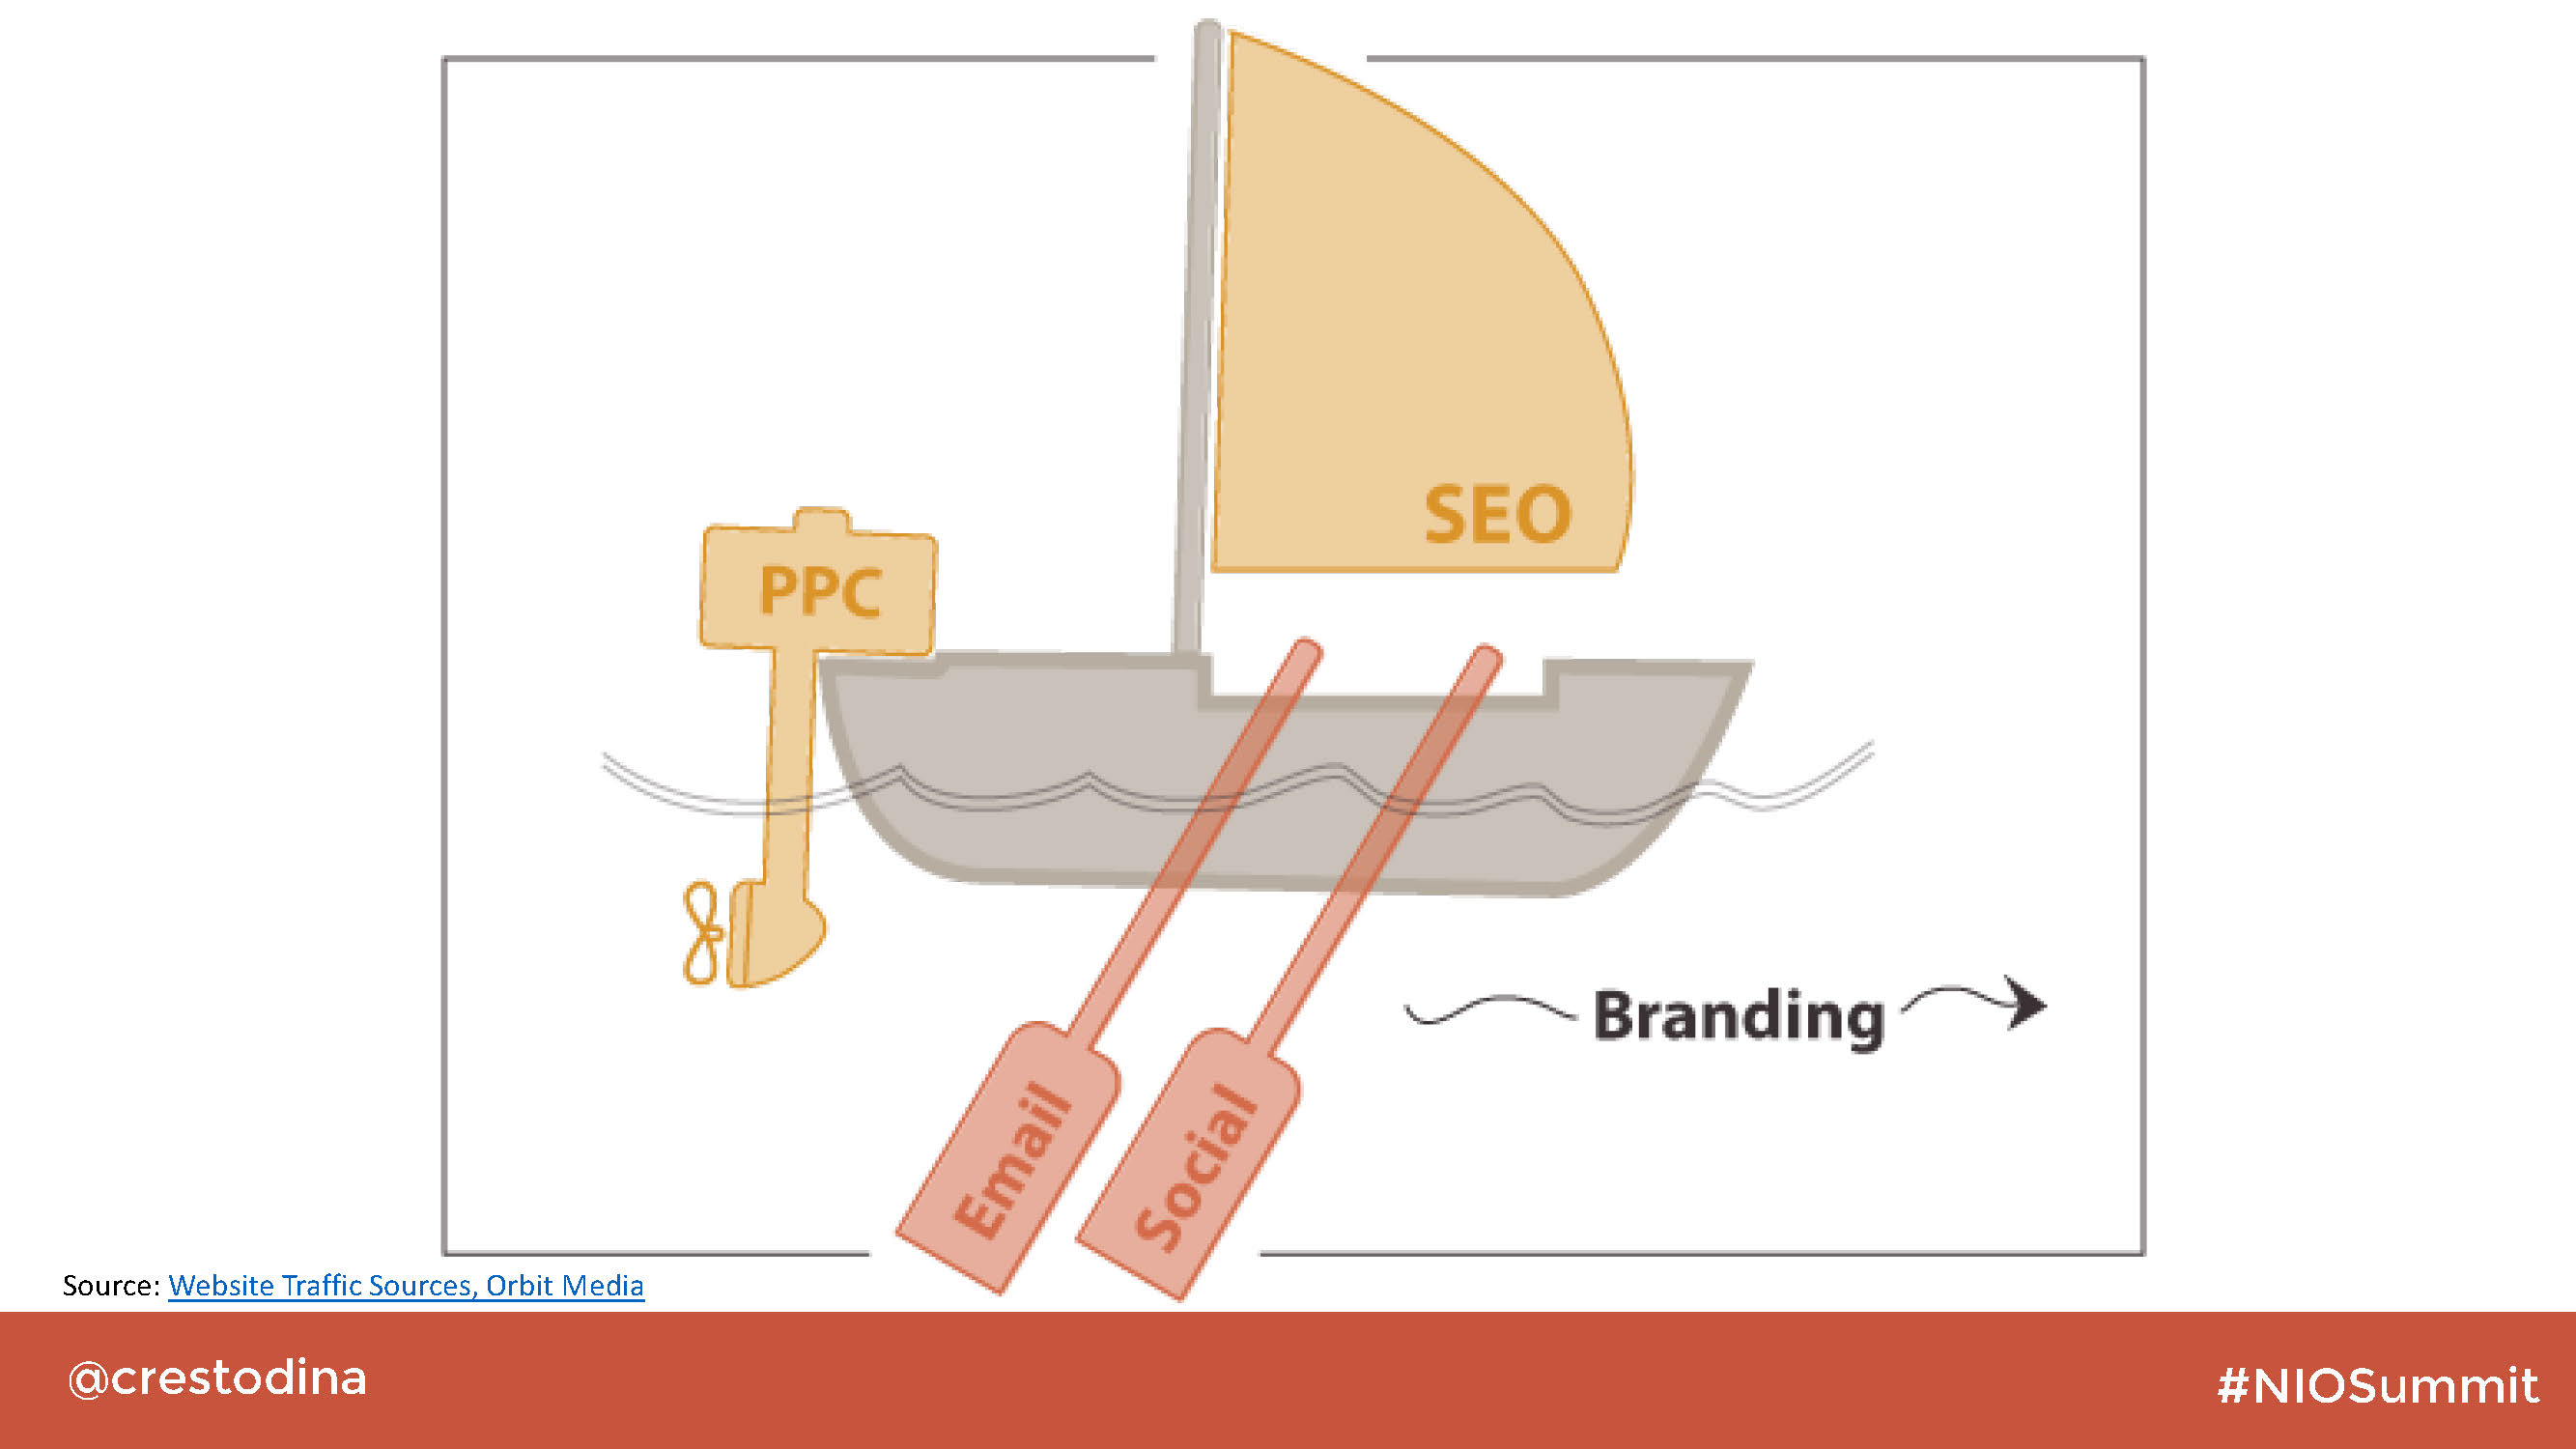 Image of a boat, with SEO as the sail, PPC as the gas-guzzling motor, and email and social as the oars.